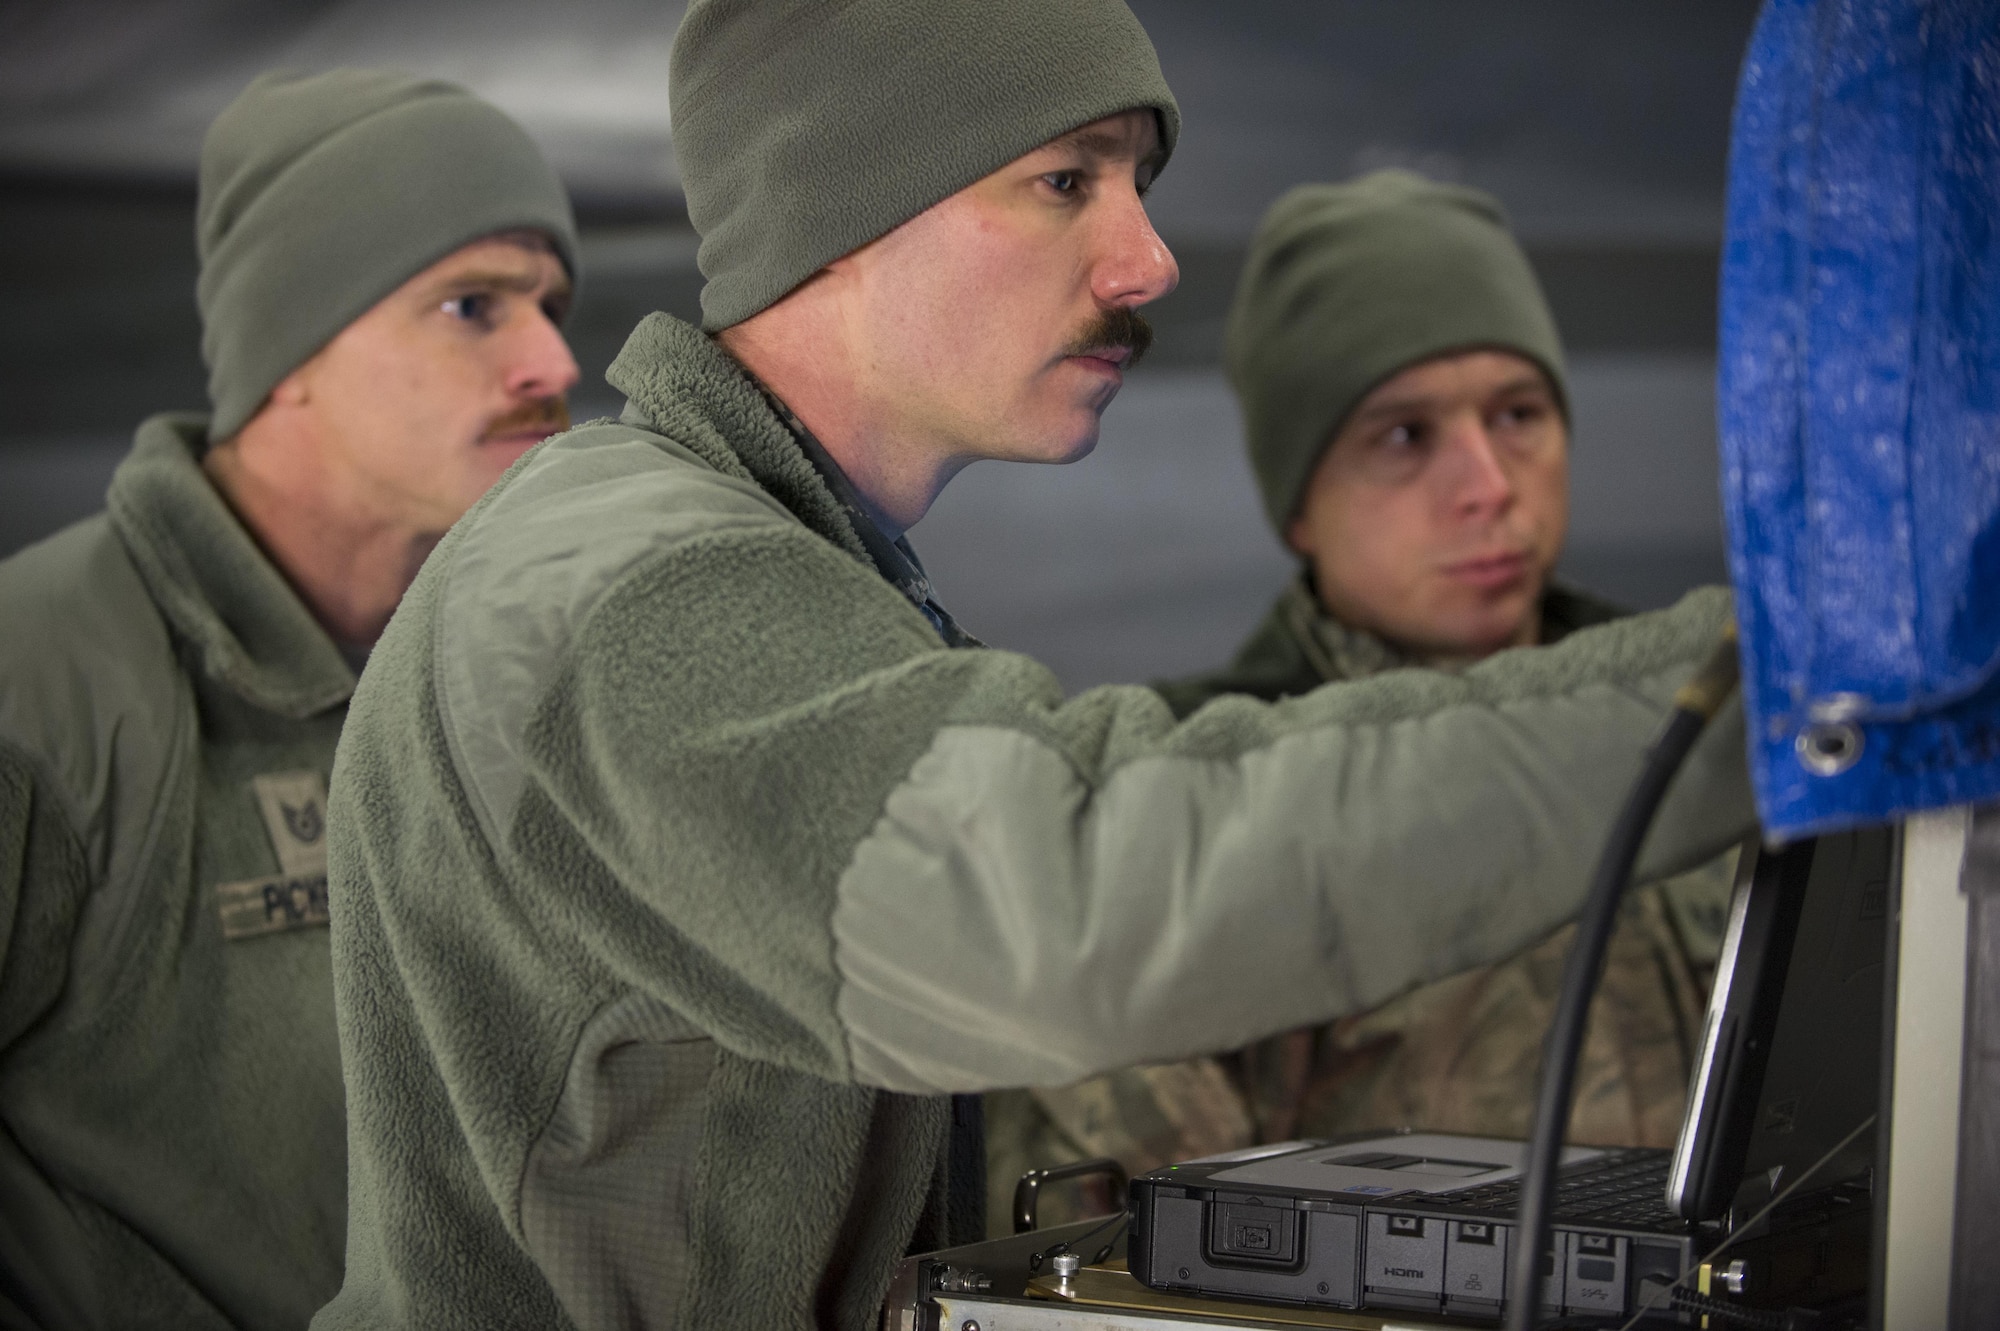 Staff Sgt. John Holm, center, Tech. Sgt. Jesse Pickrell, left, and Tech. Sgt. Matthew Hoover, Combat Shield team
members from the 16th Electronic Warfare Squadron, Eglin Air Force Base, Fla., conduct diagnostic testing evaluations on an F-16 Fighting Falcon at Spangdahlem Air Base, Germany, March 23, 2017. Holm and the team used a USM-642 Raven signal generator to simulate real-world radar emissions and test the sensitivity of an F-16’s threat detection systems during the evaluations. (U.S. Air Force photo by Senior Airman Dawn M. Weber)